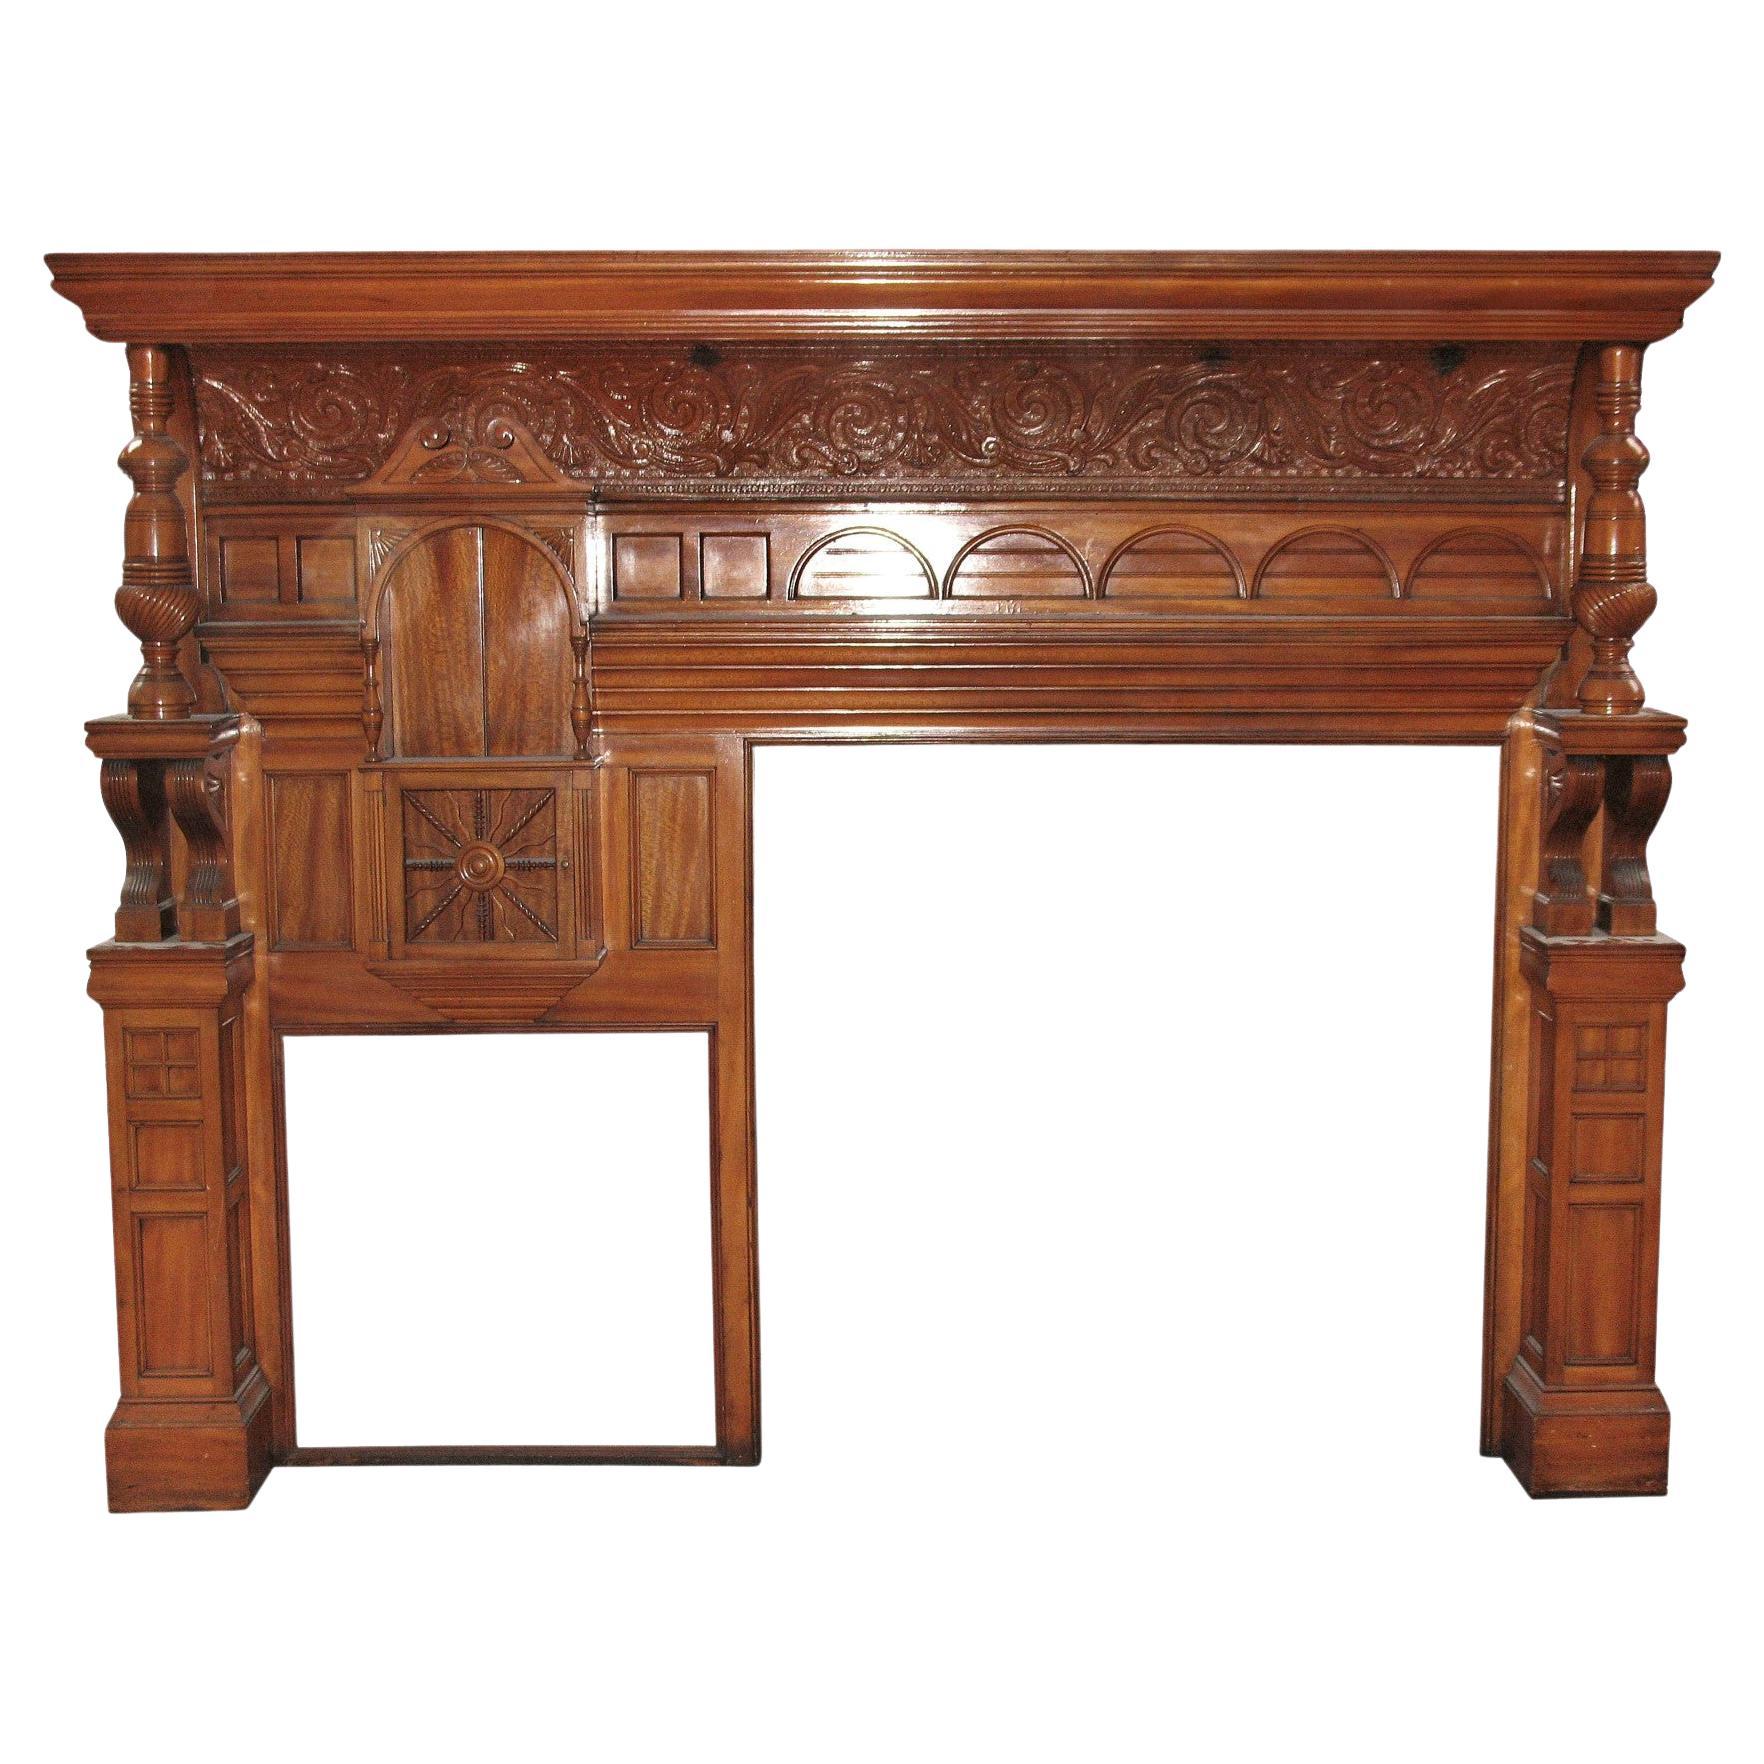 Victorian Carved Whimsical Maple Mantel Turned Columns and Corbels